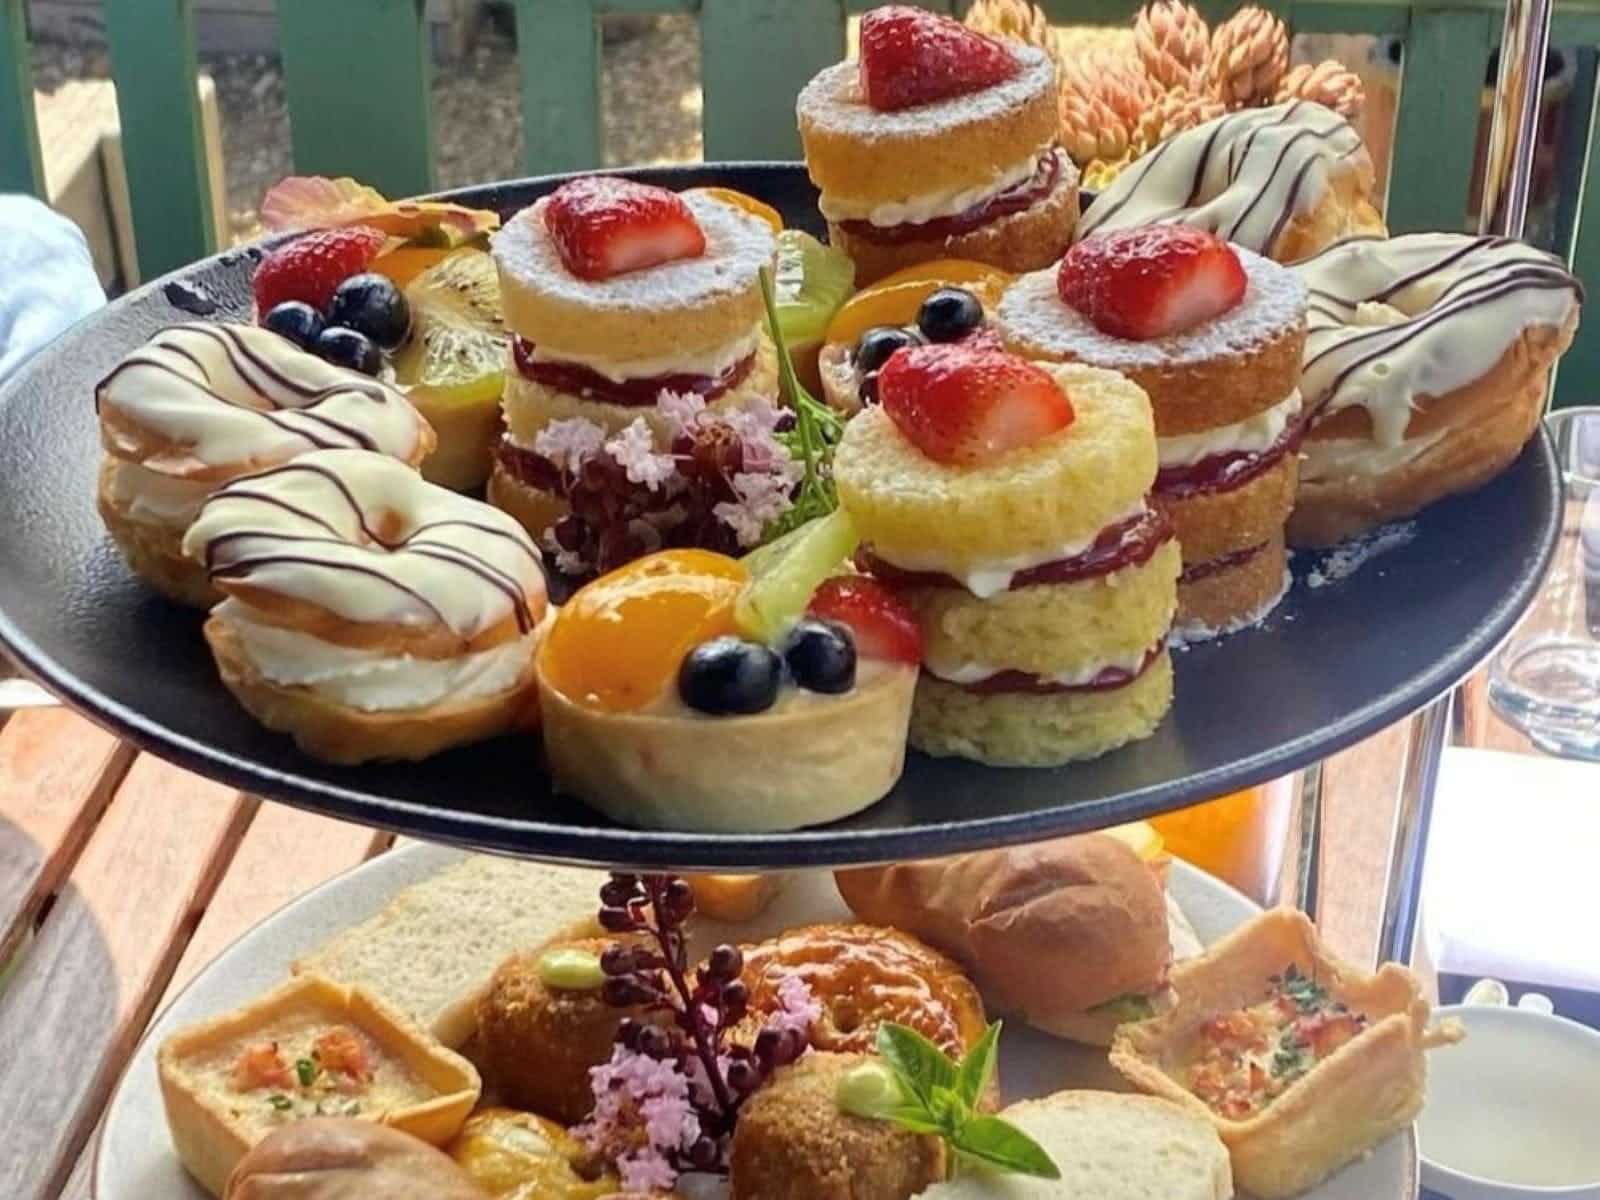 Plate of High Tea cakes and scones